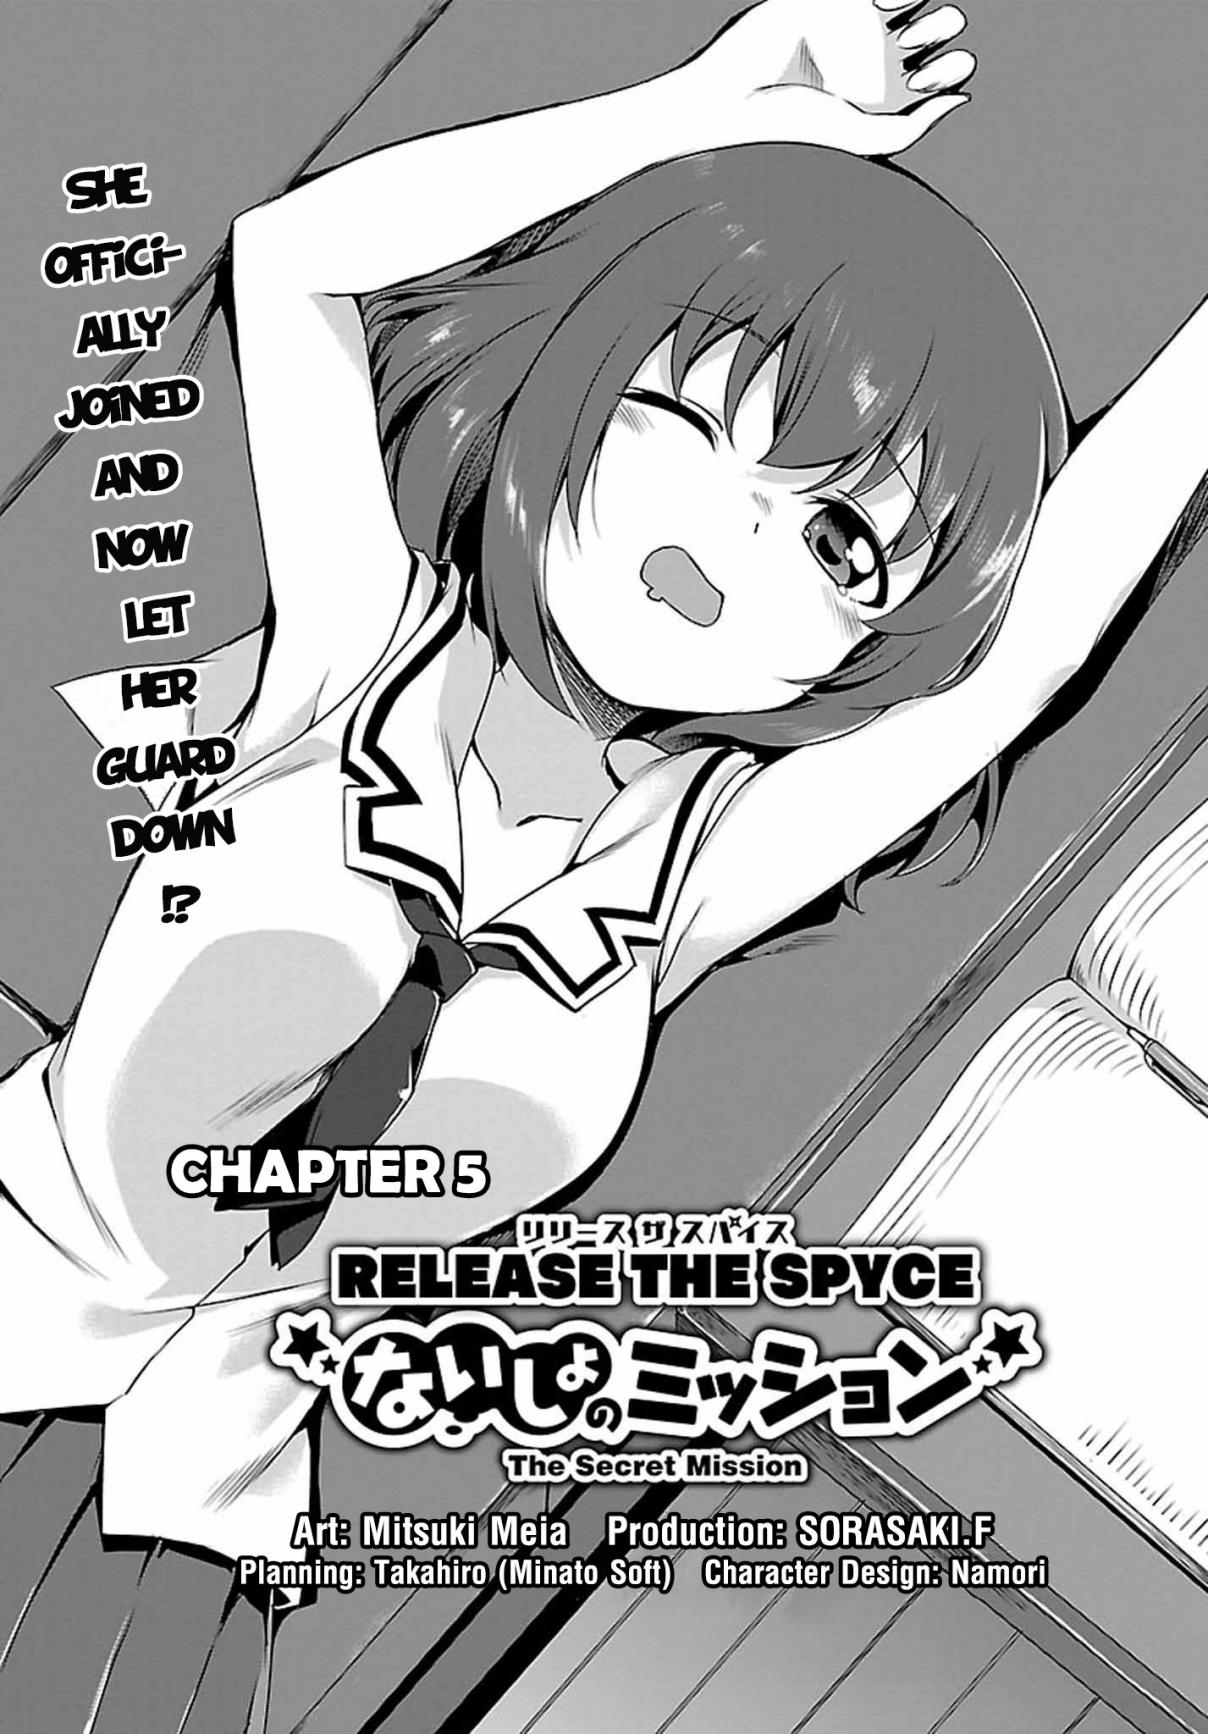 Release the Spyce: The Secret Mission Ch. 5